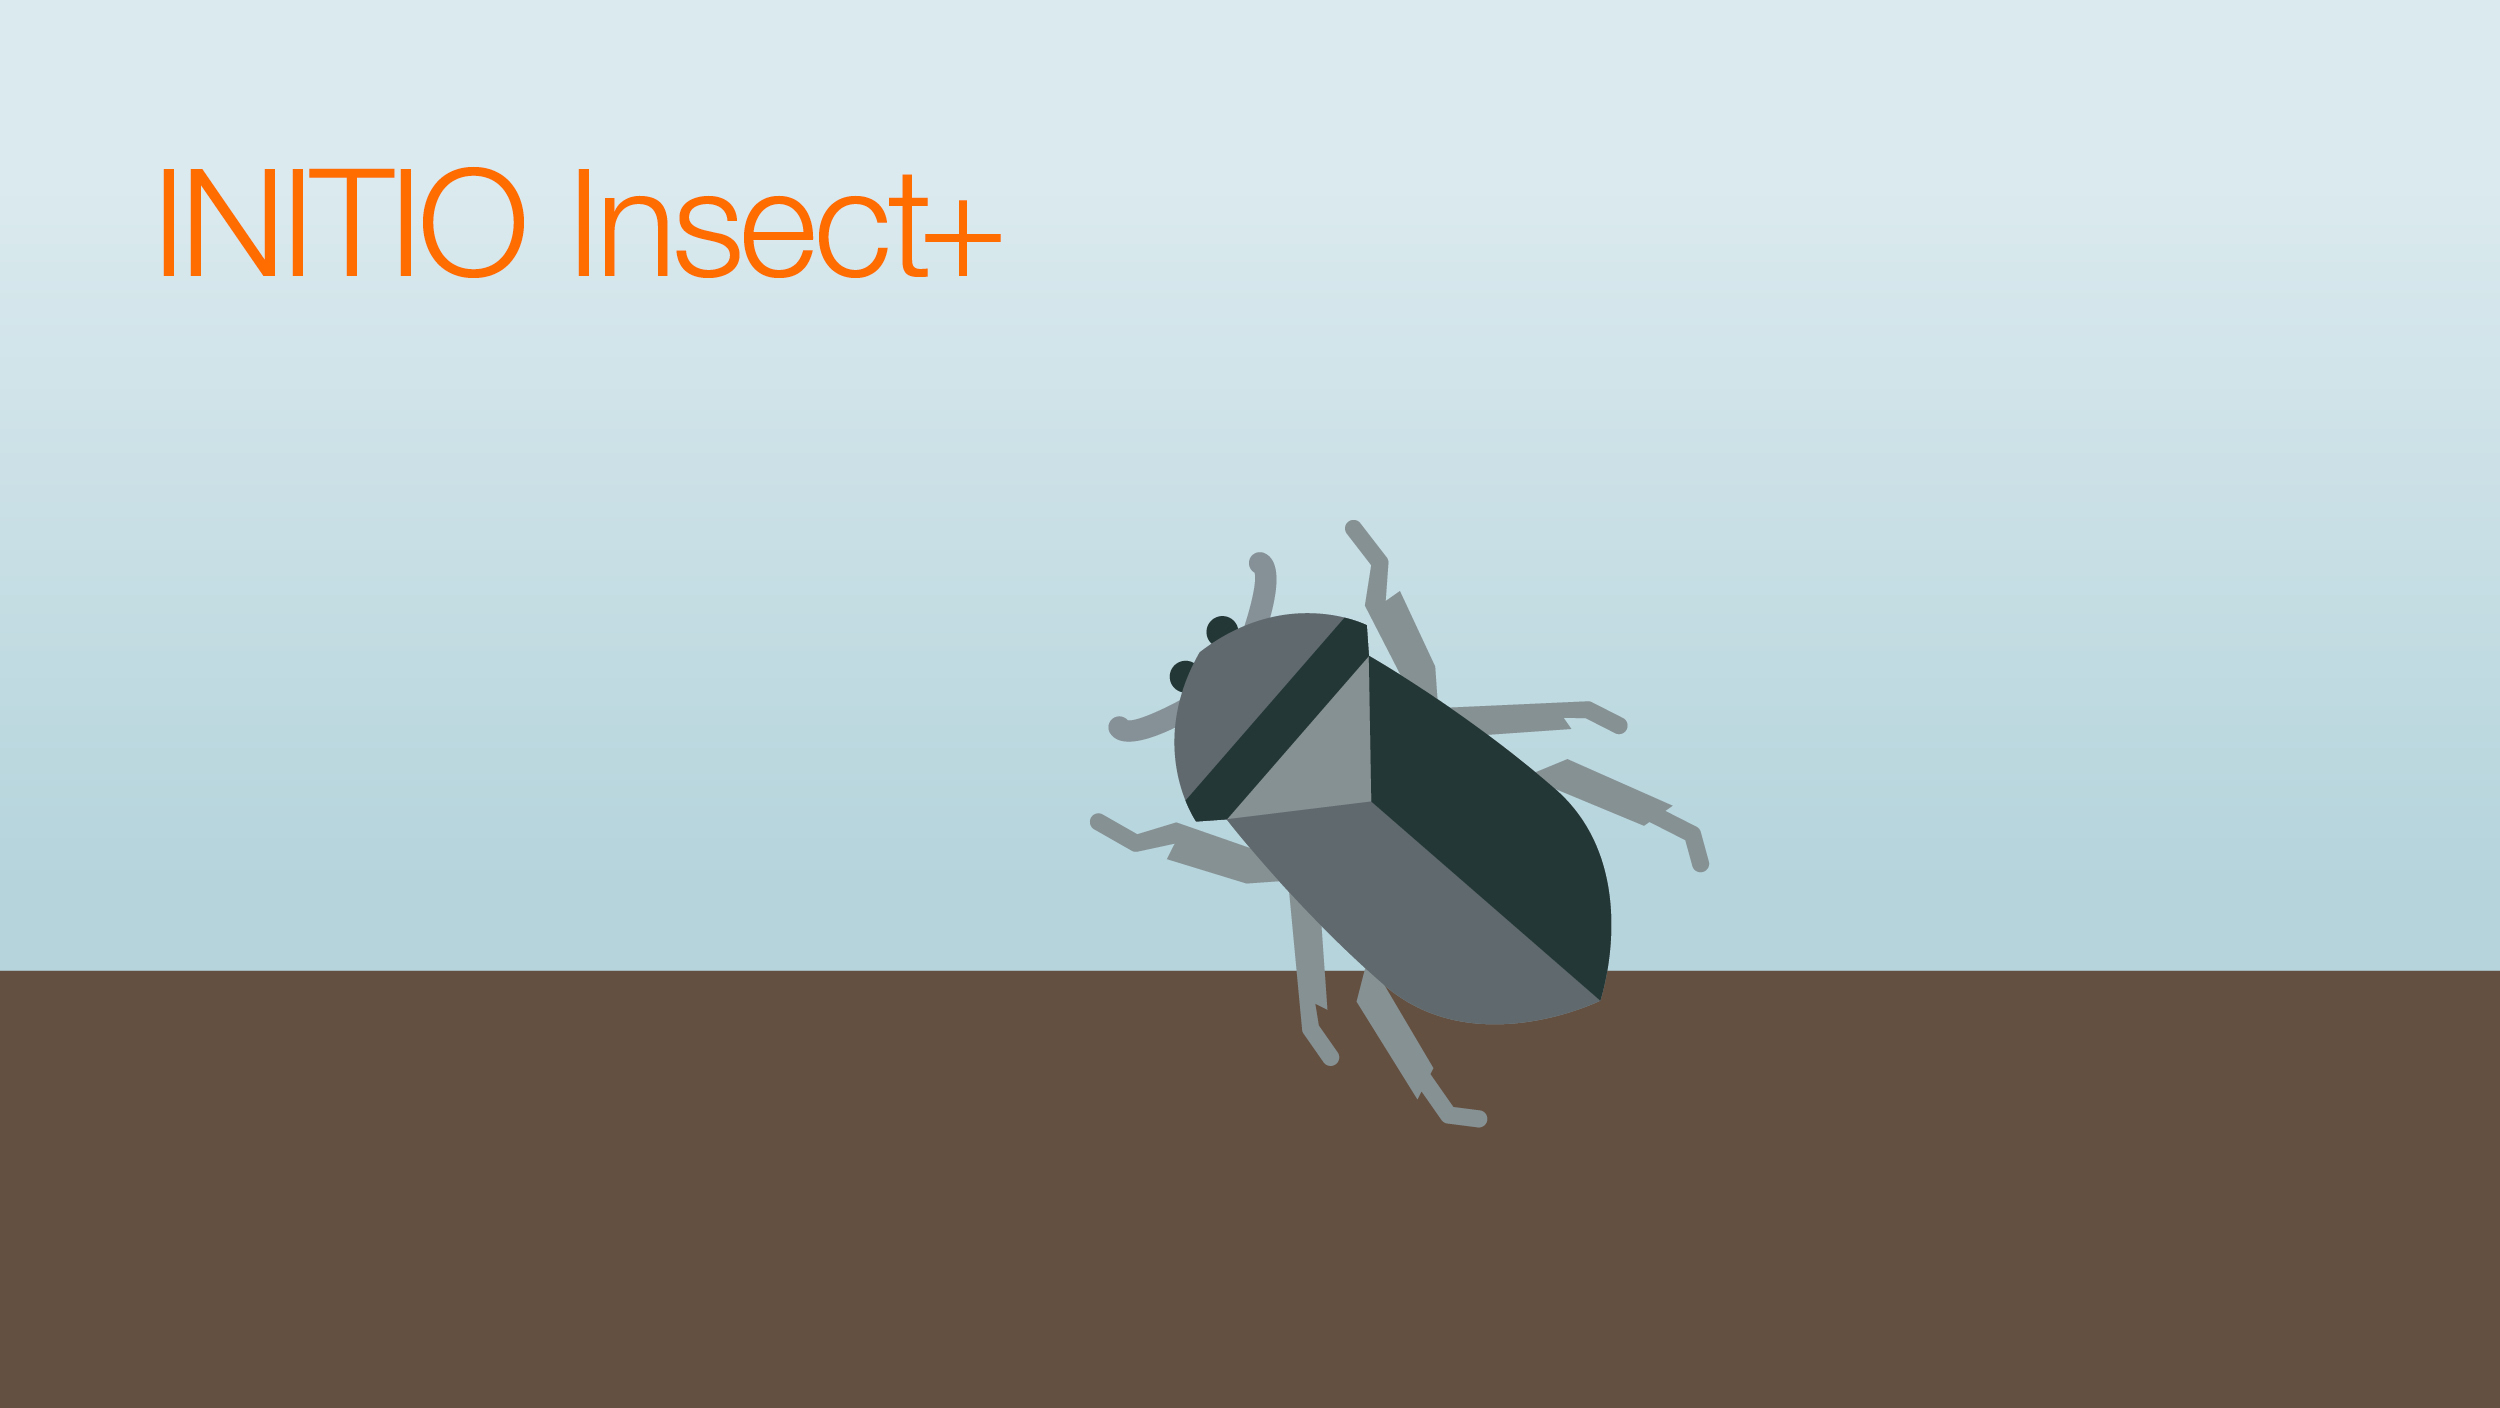 Icons_Visuals_INITIO_INSECT.jpg